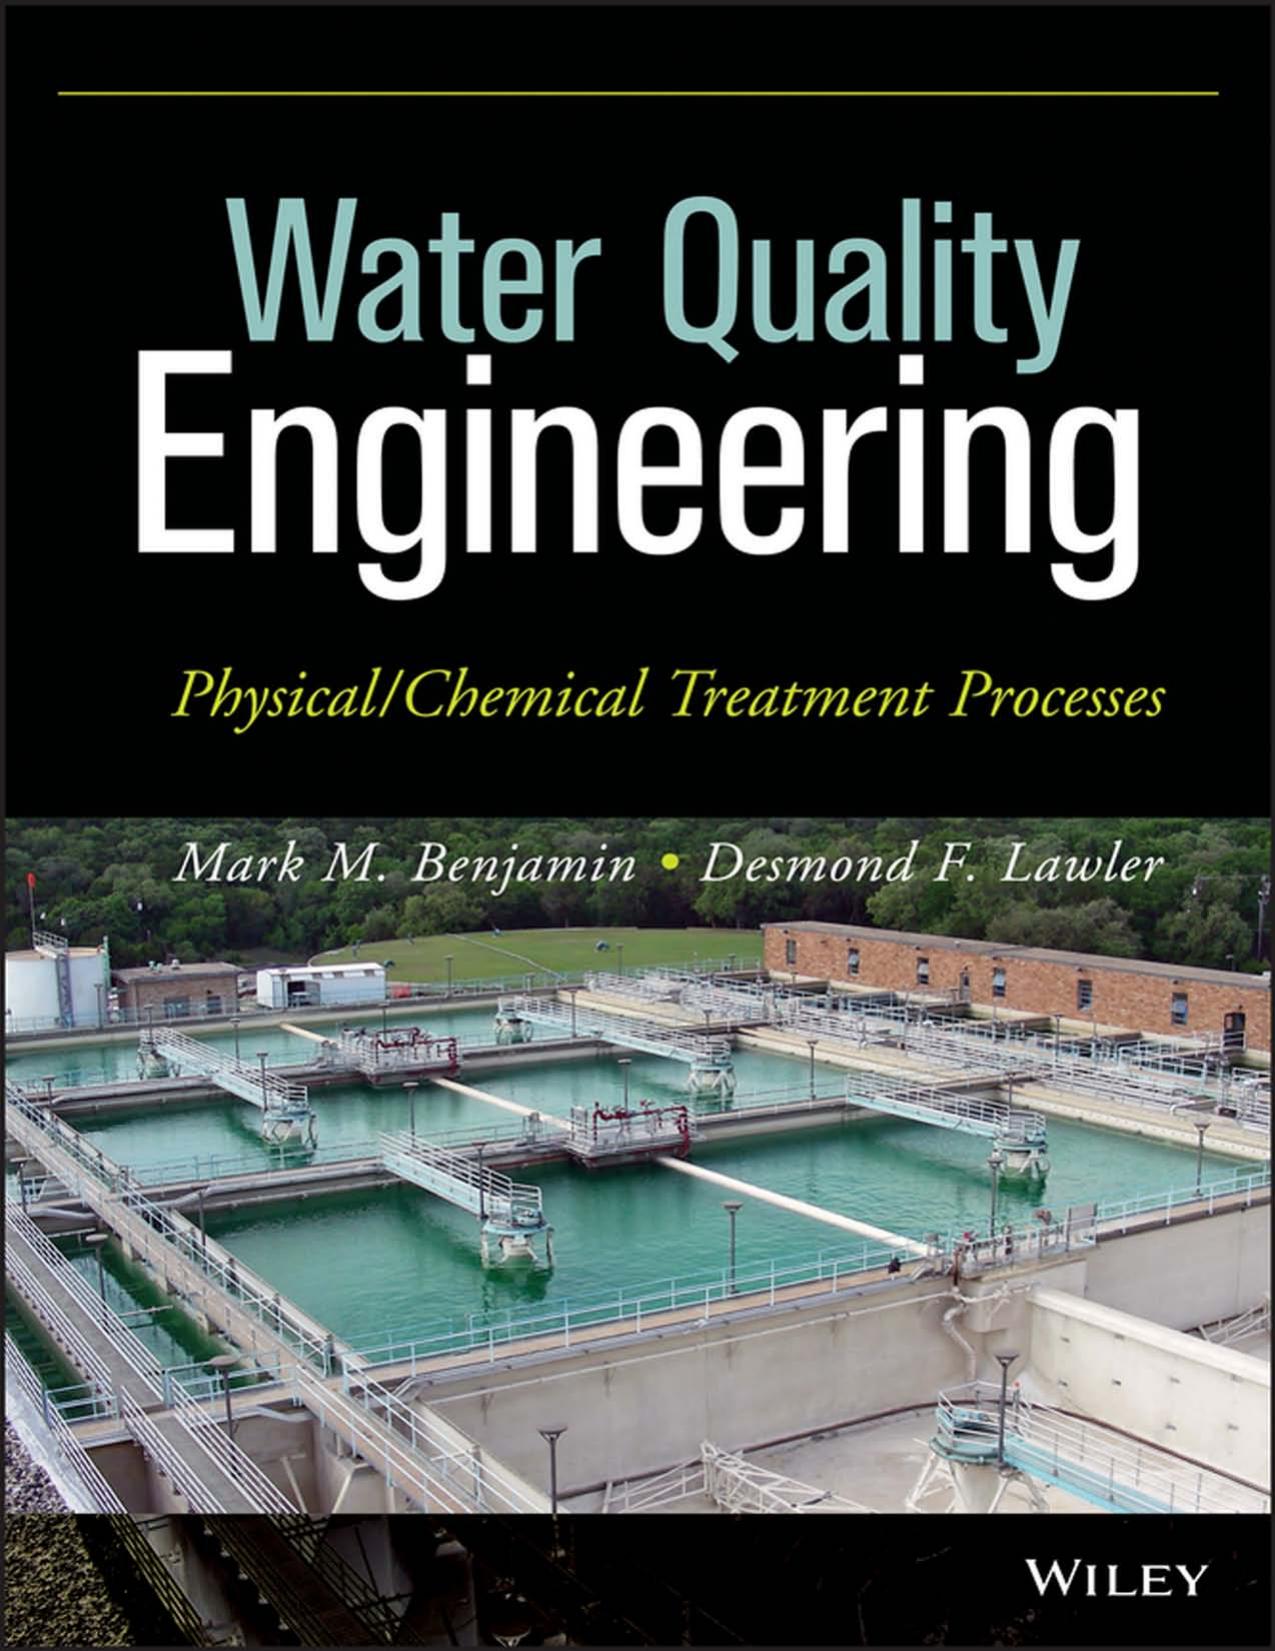 Water Quality Engineering: Physical/Chemical Treatment Processes Analysis